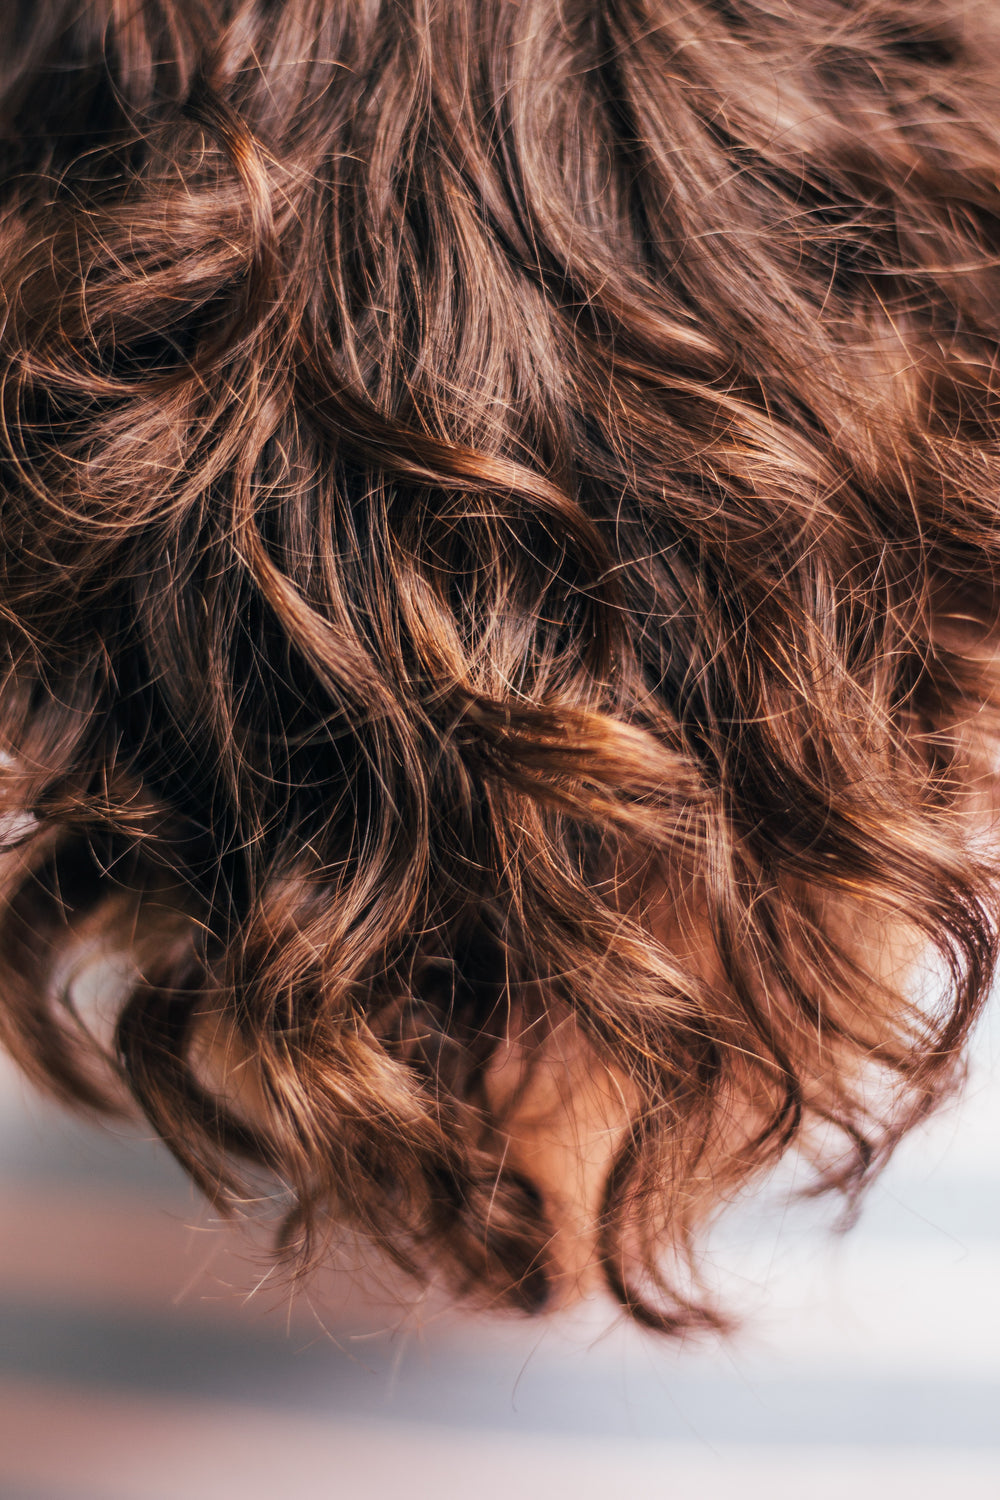 Nourishing Curls: How to Care for Curly Hair Using a Jolie Filtered Showerhead